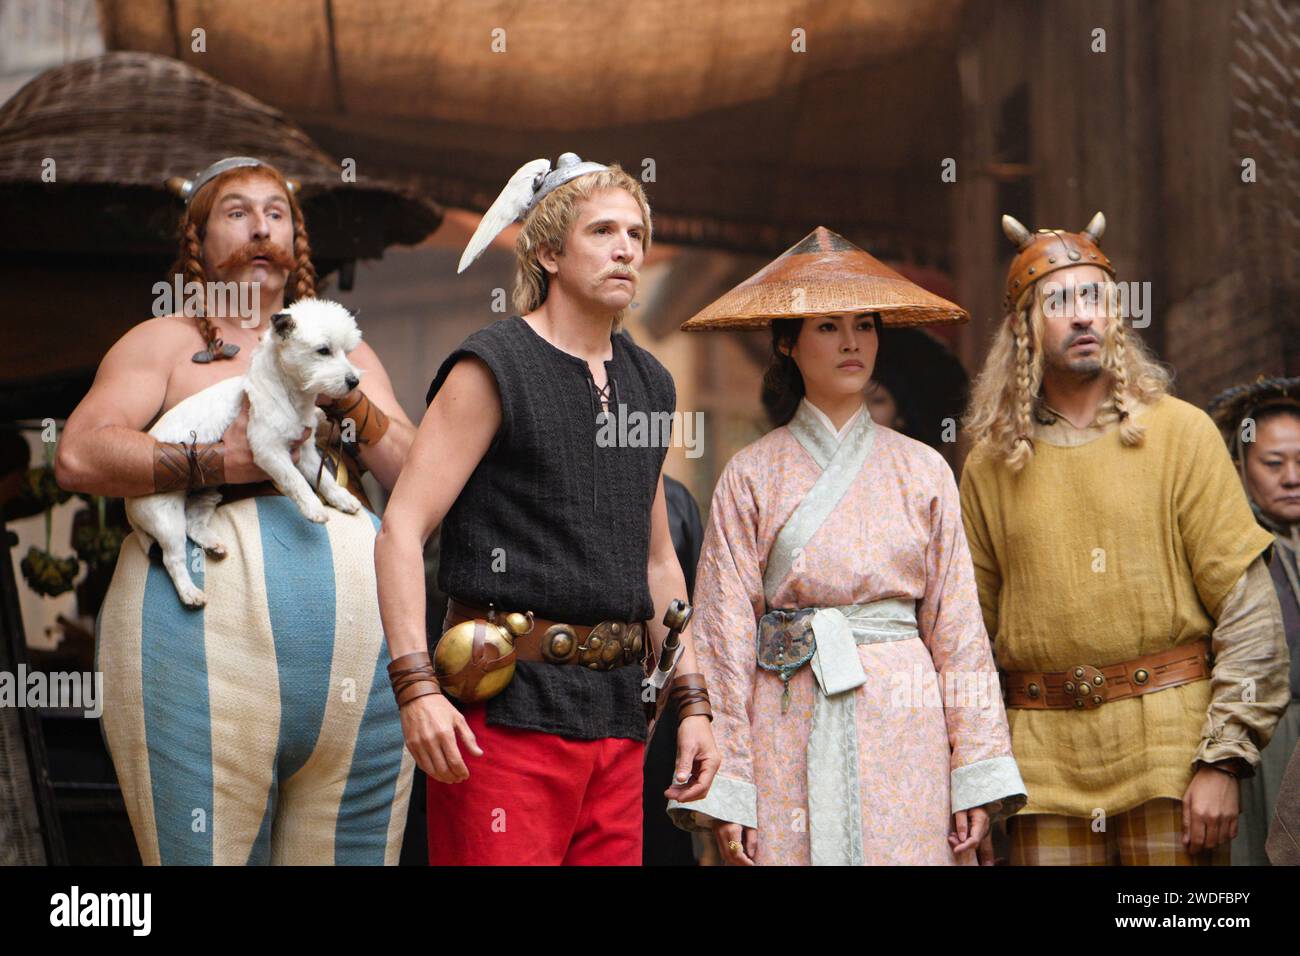 Asterix & Obelix: The Middle Kingdom (2023) directed by Guillaume Canet and starring Guillaume Canet, Gilles Lellouche, Julie Chen, and Jonathan Cohen. The only daughter of the Chinese emperor Han Xuandi, escapes from a strict prince and seeks help from the Gauls and the two brave warriors Asterix and Obelix. Publicity photograph ***EDITORIAL USE ONLY***. Credit: BFA / Pathé Stock Photo